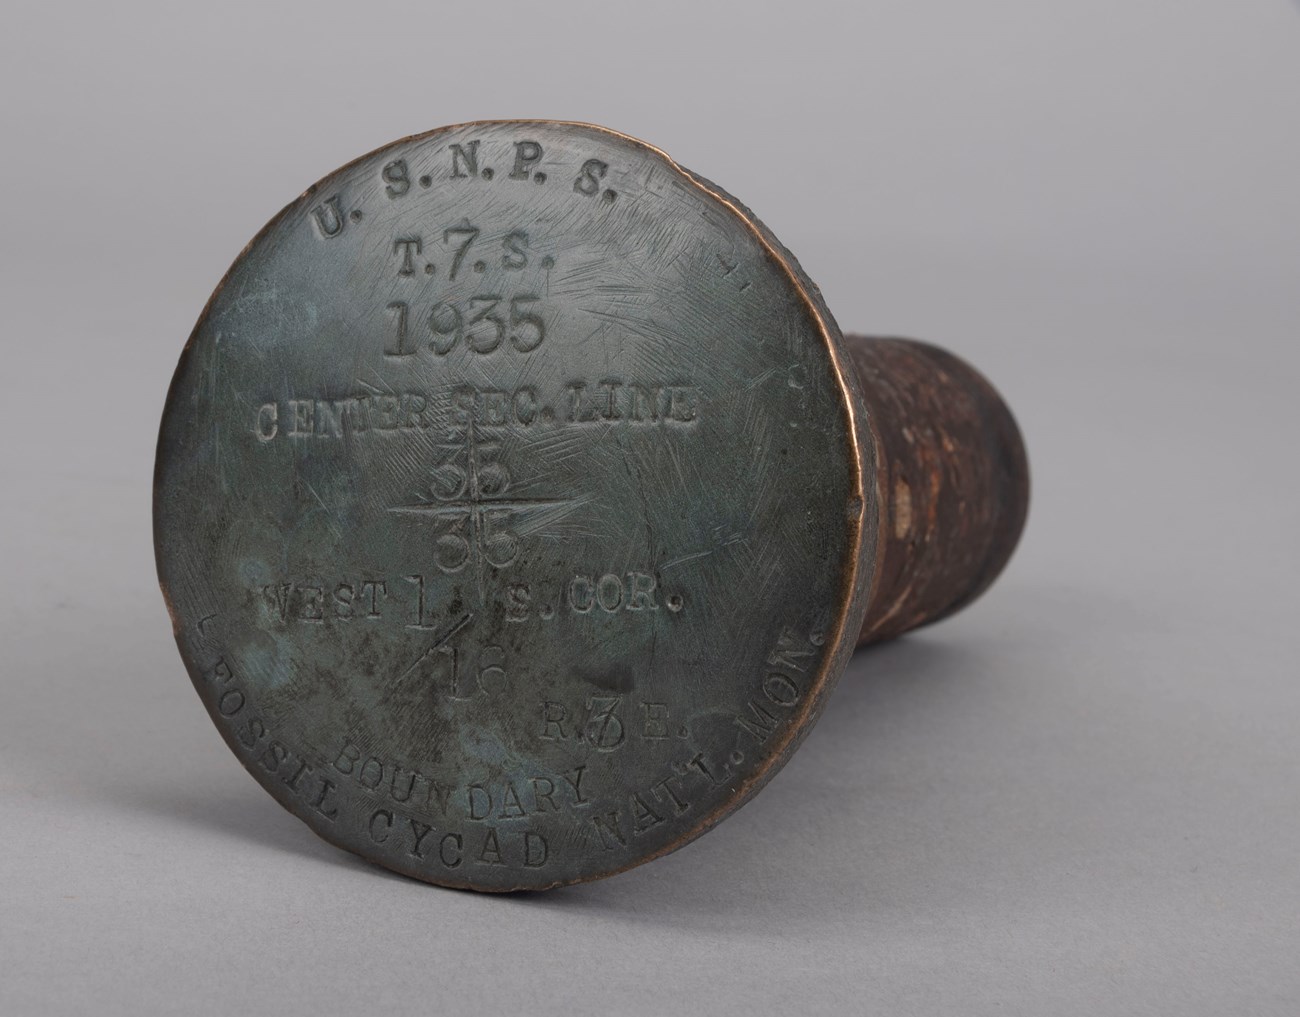 Bronze boundary marker cap including NPS, Fossil Cycad National Monument, and 1935 date.